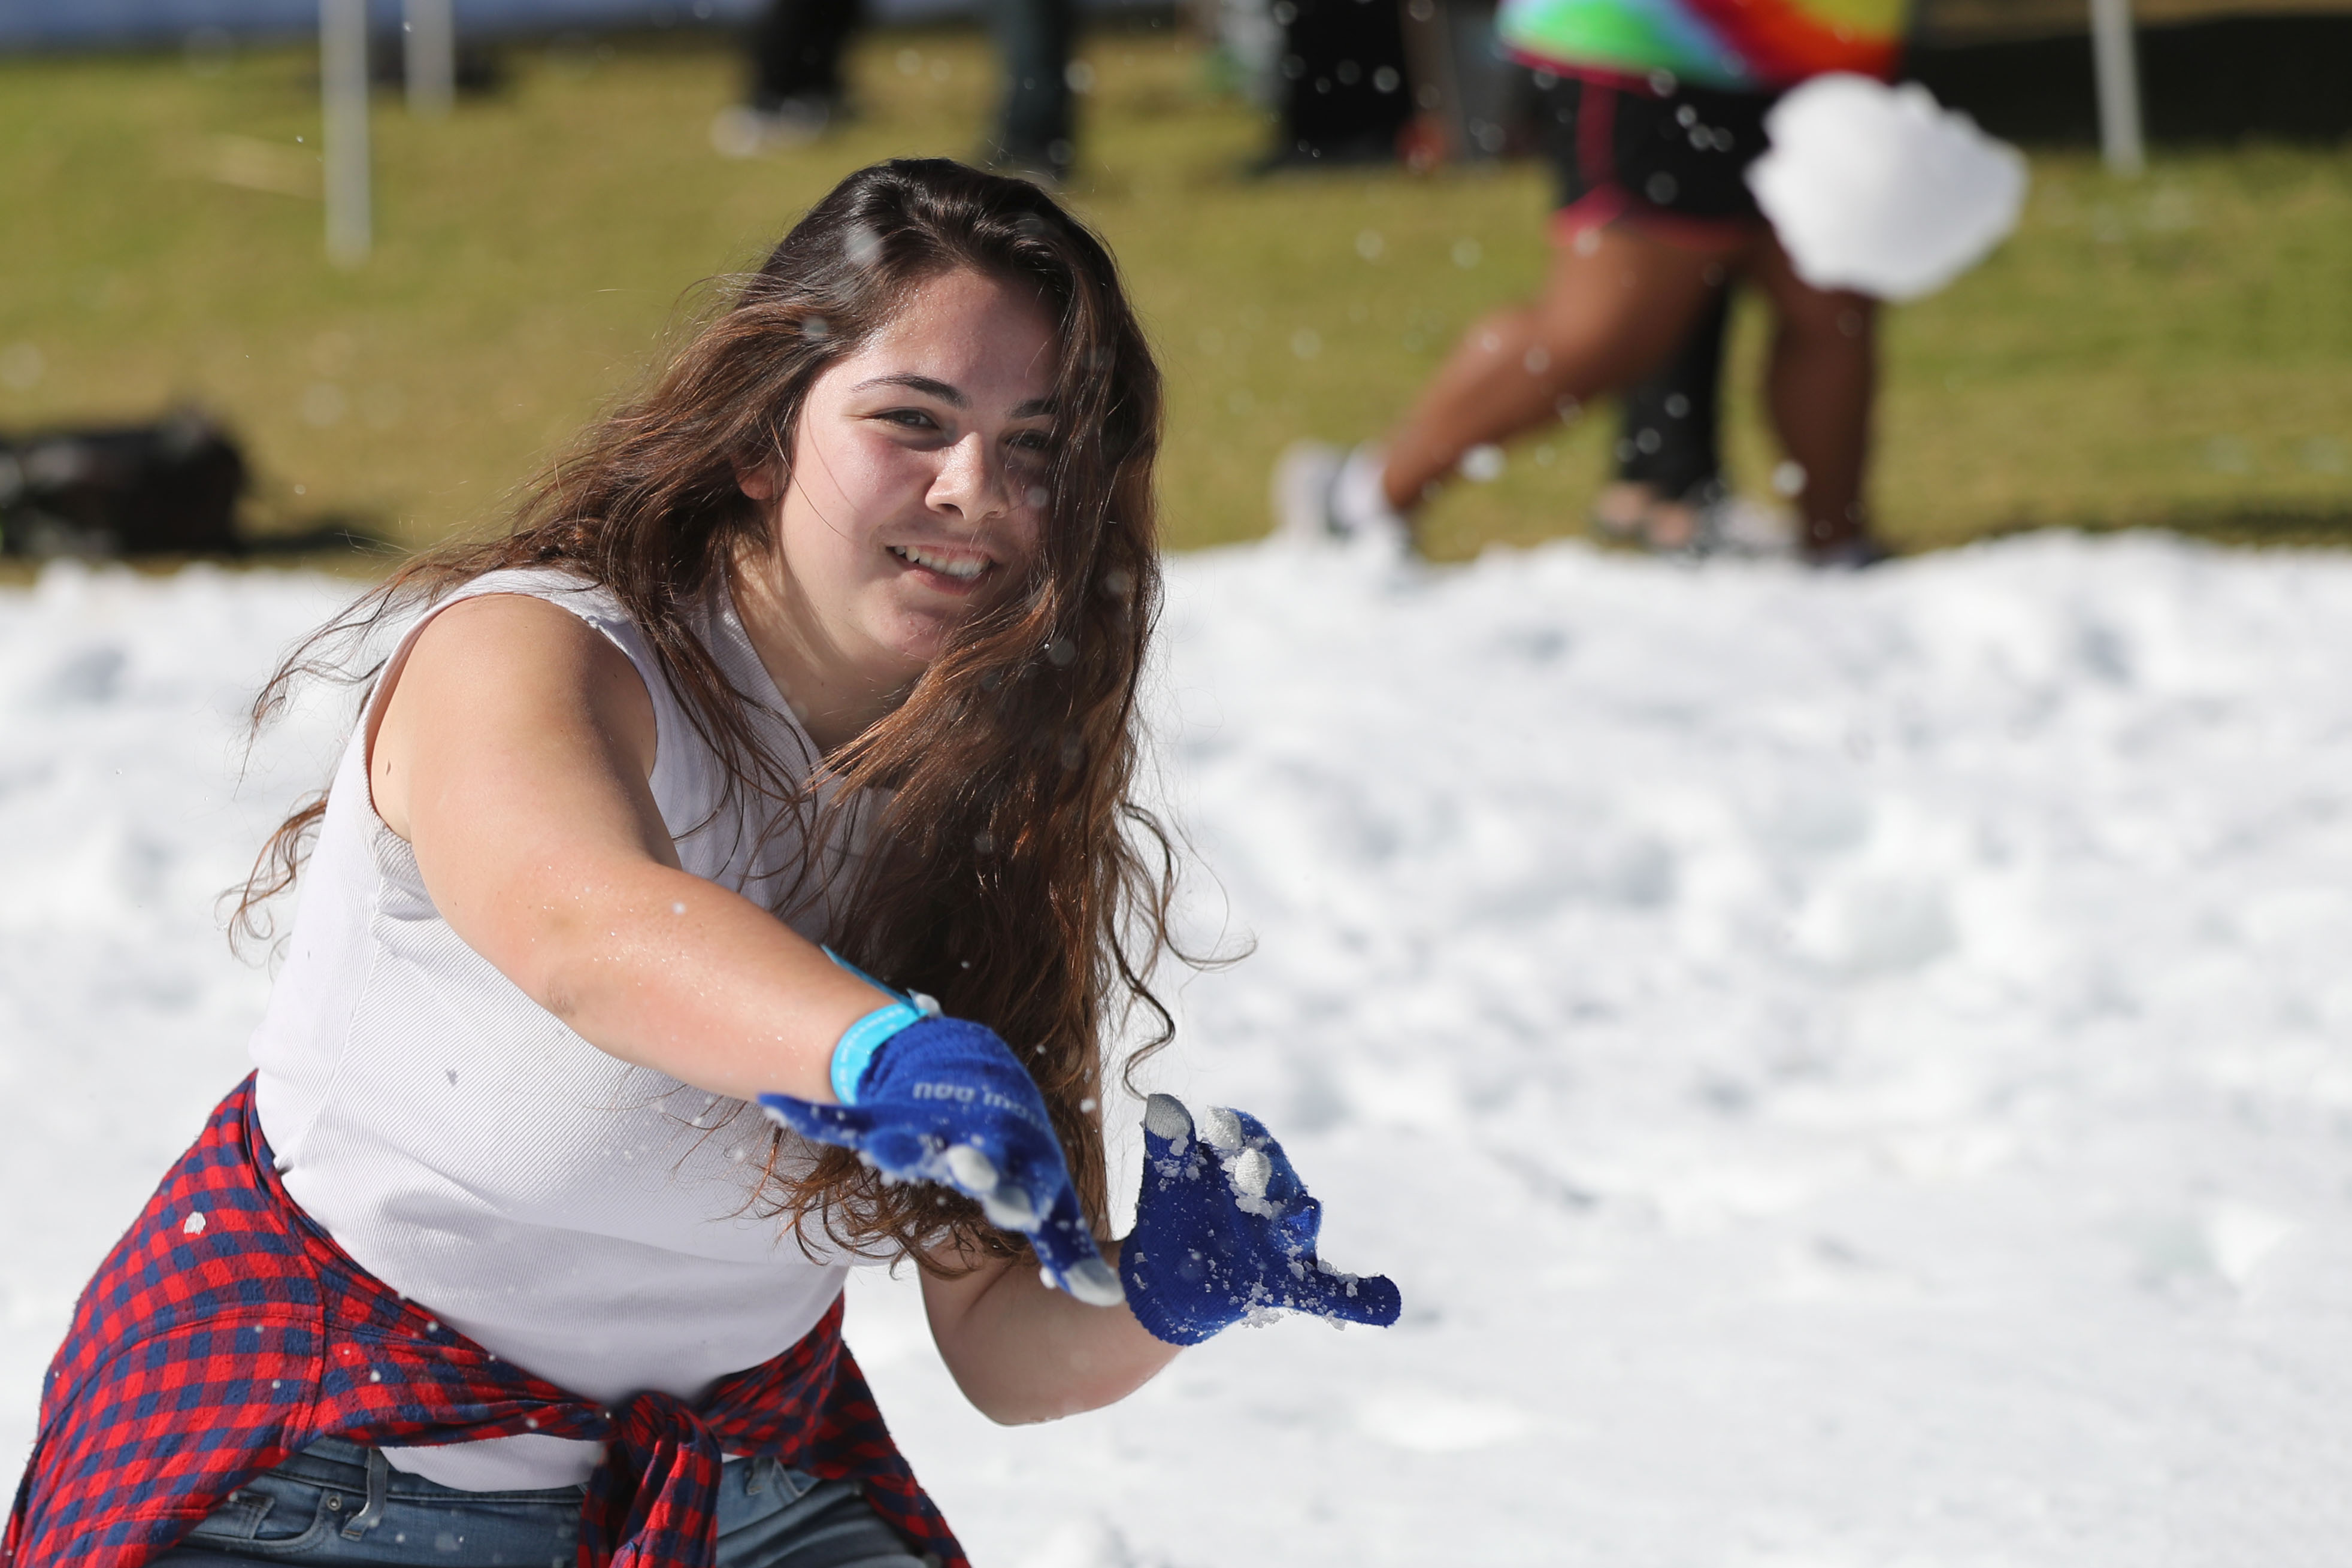 Tossing snow balls during Snow Day at CSUSB.